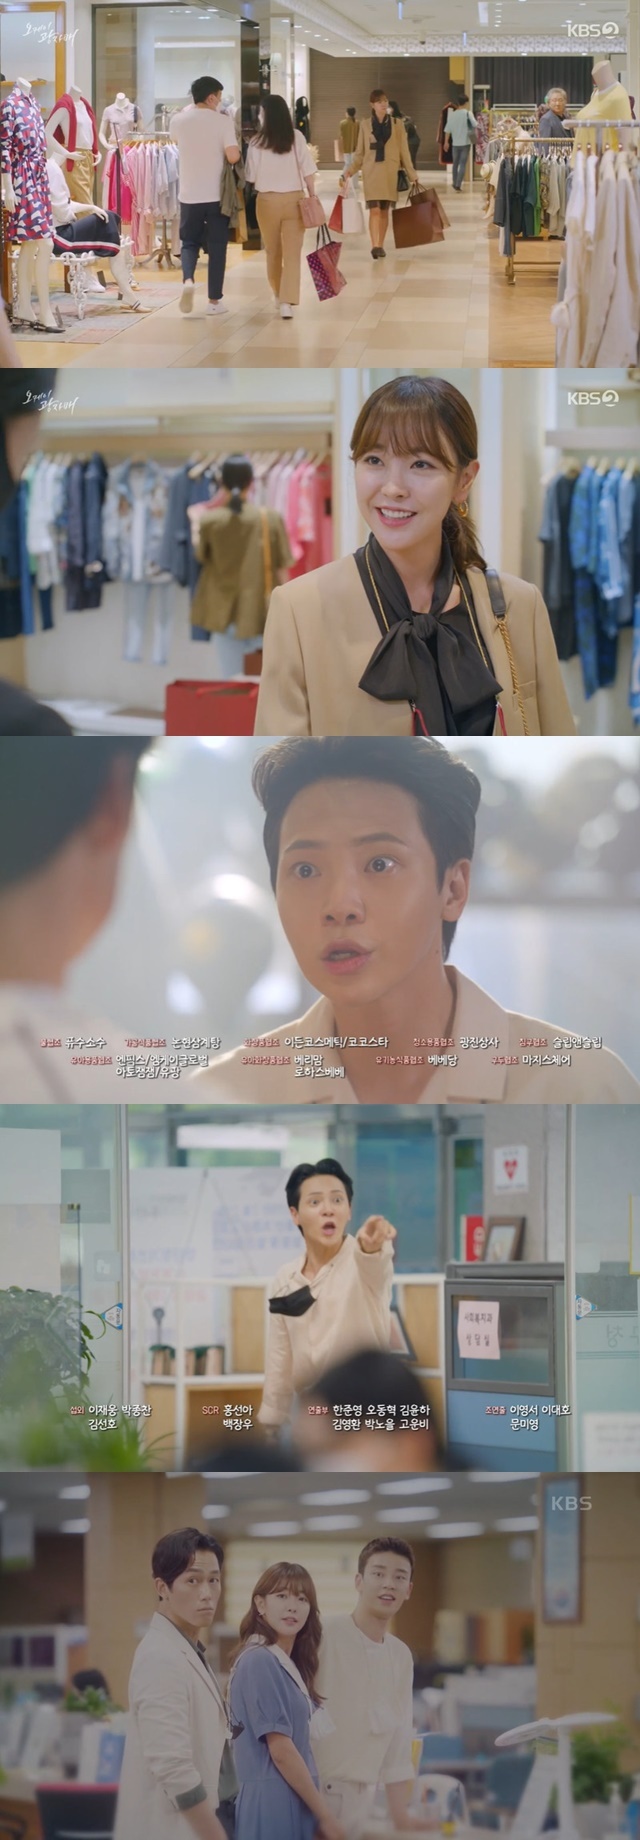 Ko Won-hee has signaled a crisis in the out of Wedlock just before Marriage report.On the weekend of KBS 2TV, which aired on July 25, KBS 2TVs drama Okay Photo Sister 37 times (playplayed by Moon Young-nam/directed by Lee Jin-seo), Lee Kwang-tae married Huh Ki-jin (played by Se-hwan), and wrote a Credit card by Seo Sook-hee Huh Pung-jin (played by Joo Seok-tae), showing a 180-degree change.Lee Kwang-tae married Hugi Jin and cheated on the out of the bedlock lie and became a landlords wife and Kaiji.At the same time as his marriage, Hugijin started to manage the building that his brother Huang Jin set up in his name, and Huang Jin waited for his nephew and gave Lee Kwang Tae a Credit card.Lee Kwang-tae was shopping with a crush on the Credit card, and he showed off his spending with a rich daughter-in-law by buying the finest meat and fruits.Heo Pung-jin withdrew after learning that Lee Kwang-tae had scratched too many cards and bought gifts for him.The reason why Huh Pung-jin gave his brother Huh Gi-jin and Lee Kwang-tae the building and Credit card is because they believe that my nephew is born soon.However, through the trailer at the end of the broadcast, it was portrayed that Byun Sa-chae (the high-ranking person) learned Lee Kwang-taes pregnancy lie.